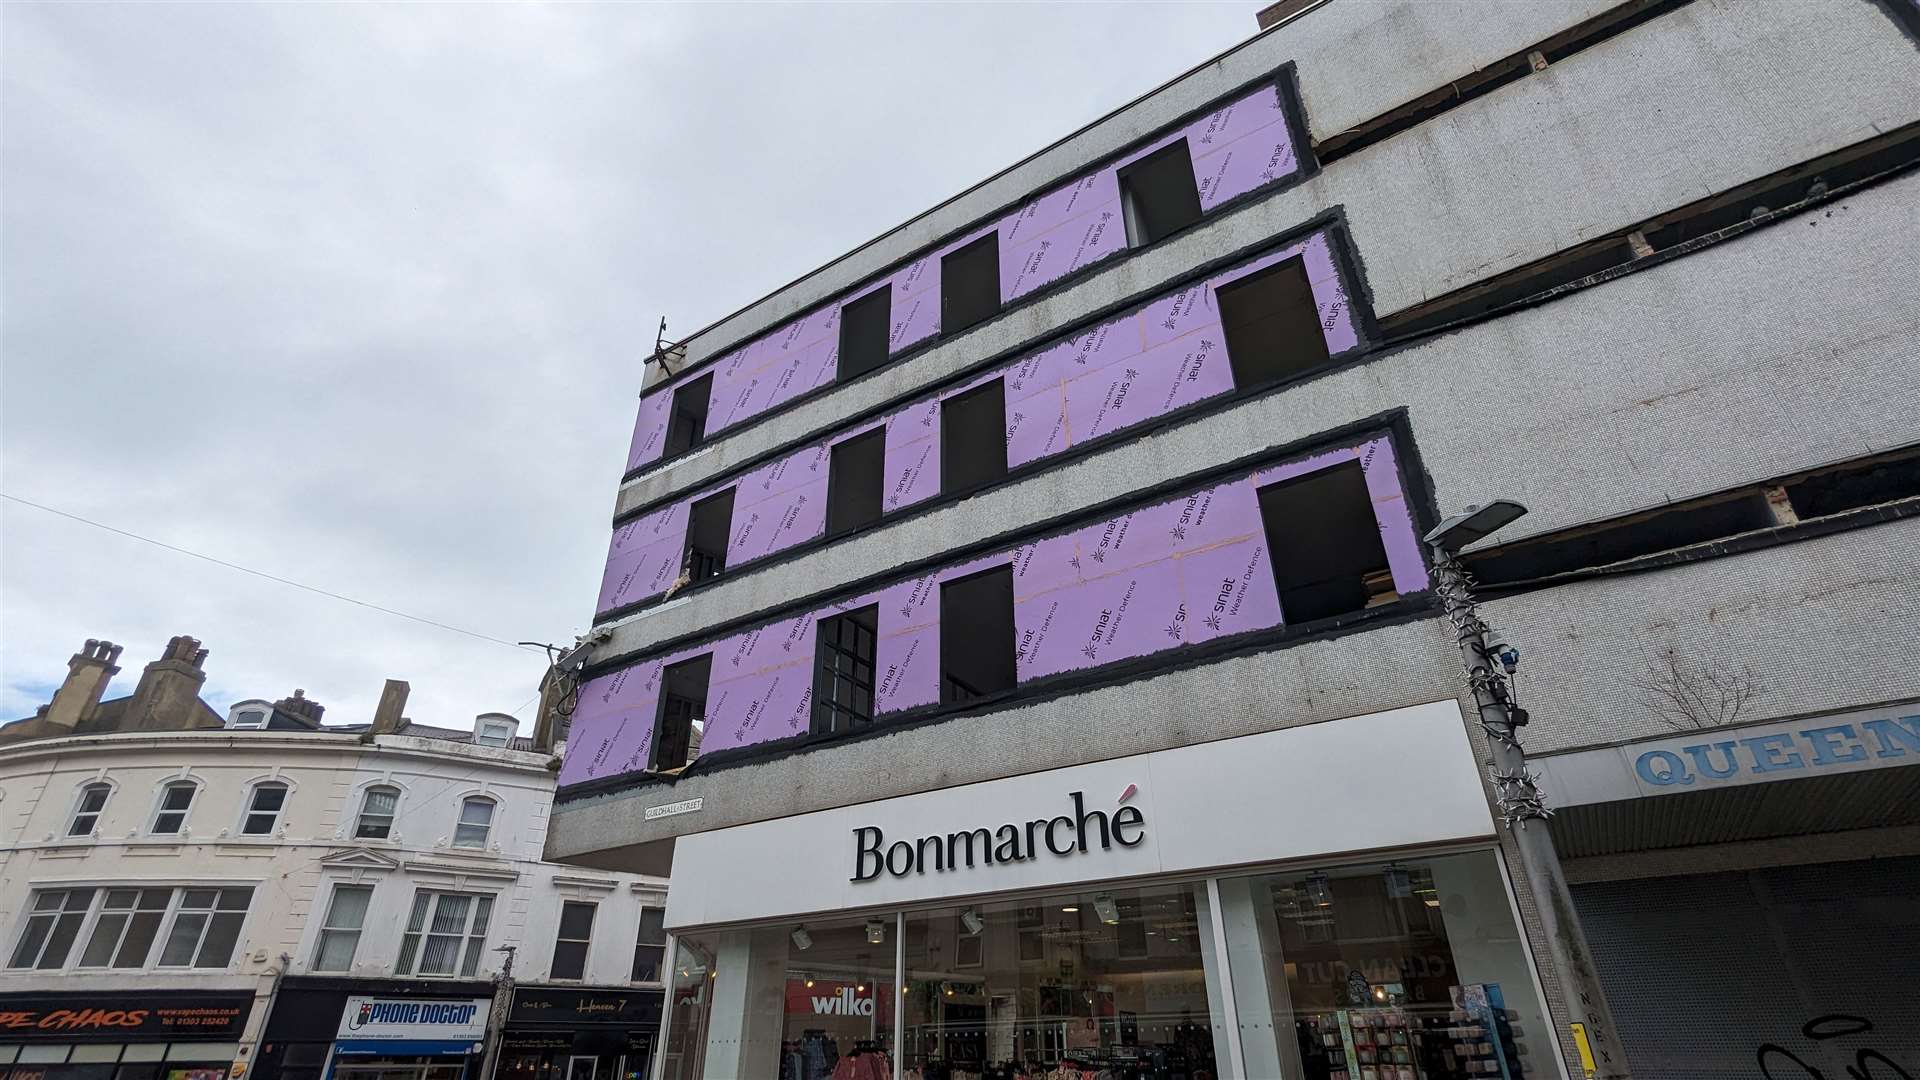 The former office block sits above the Bonmarché store